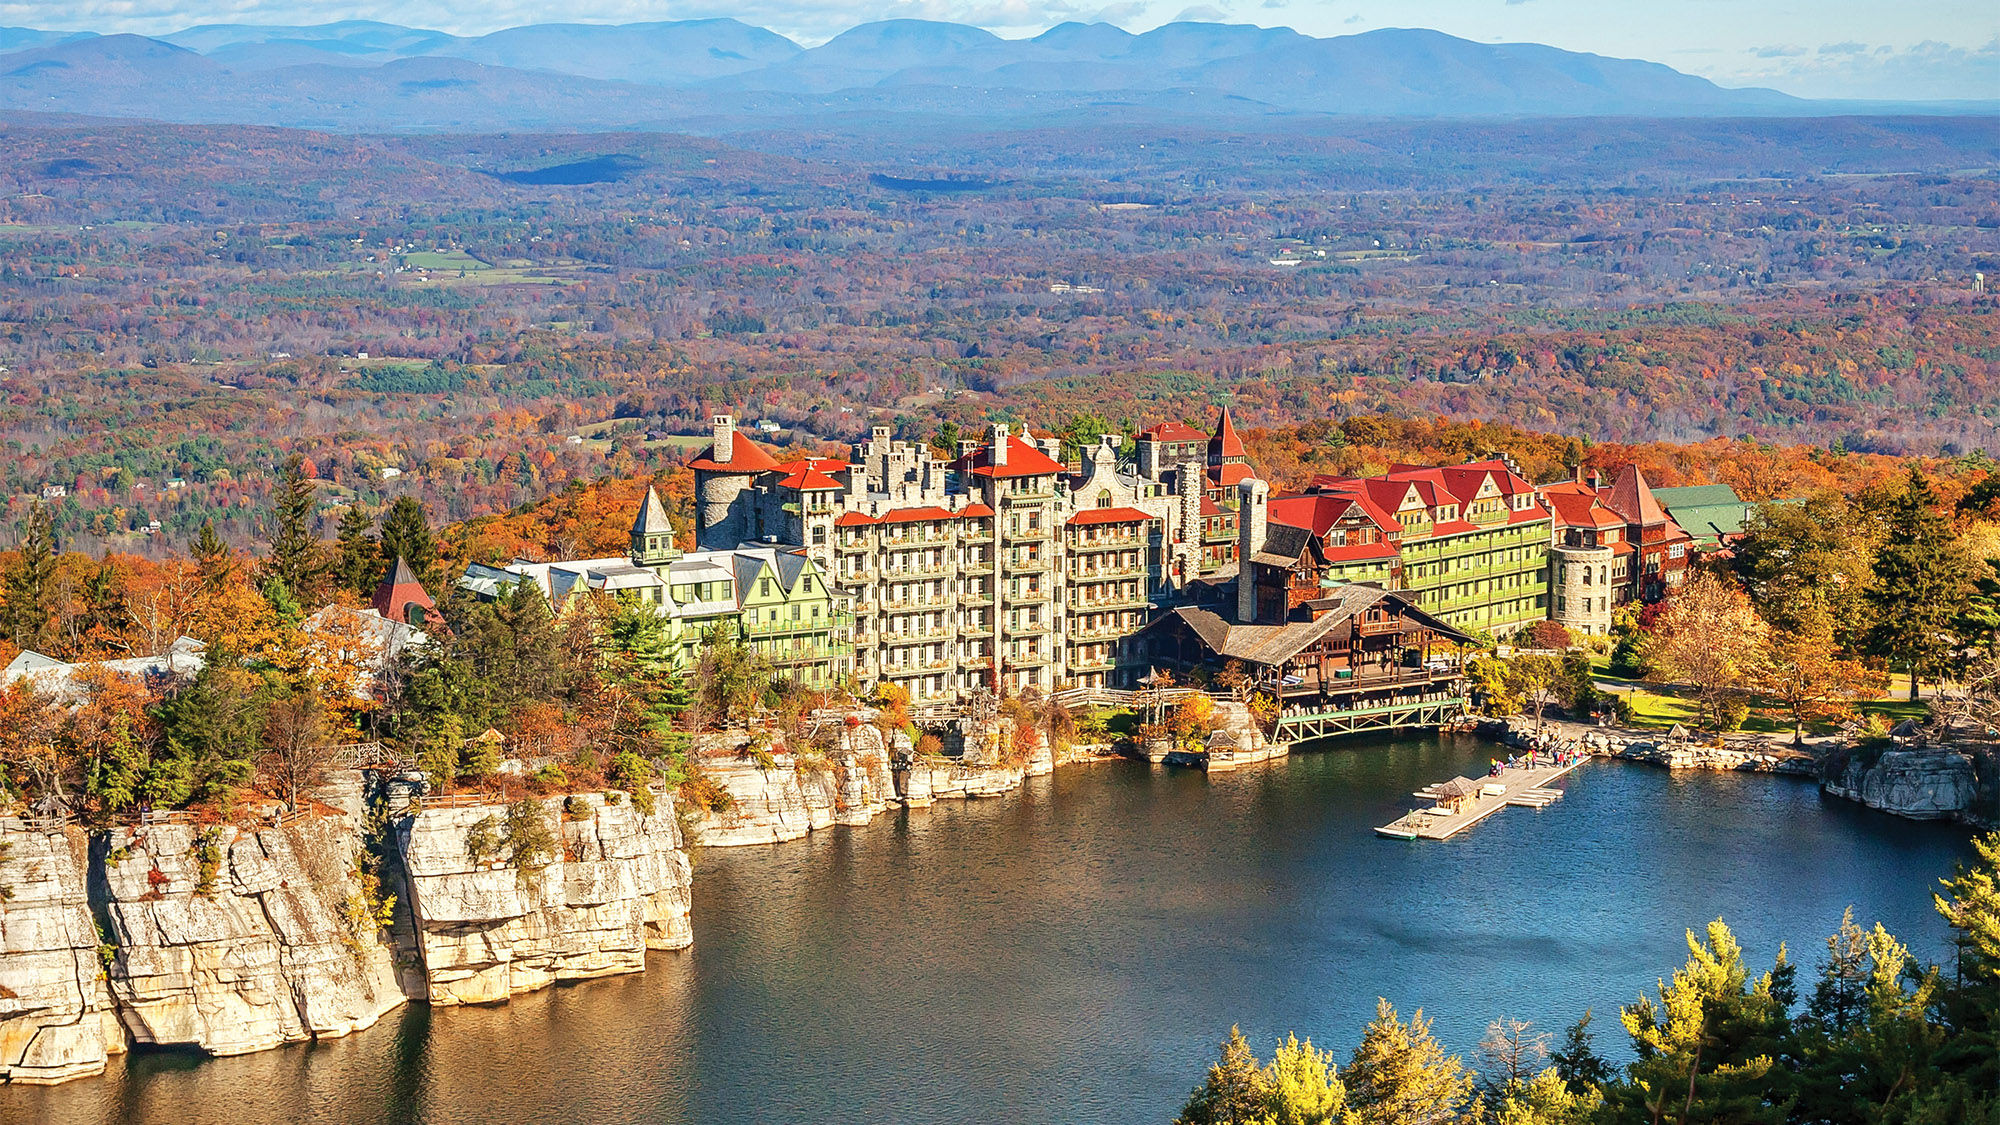 Mohonk Mountain House's "Lakeside Immersion Spa Therapy" includes a dip in the nearby Lake Mohonk.